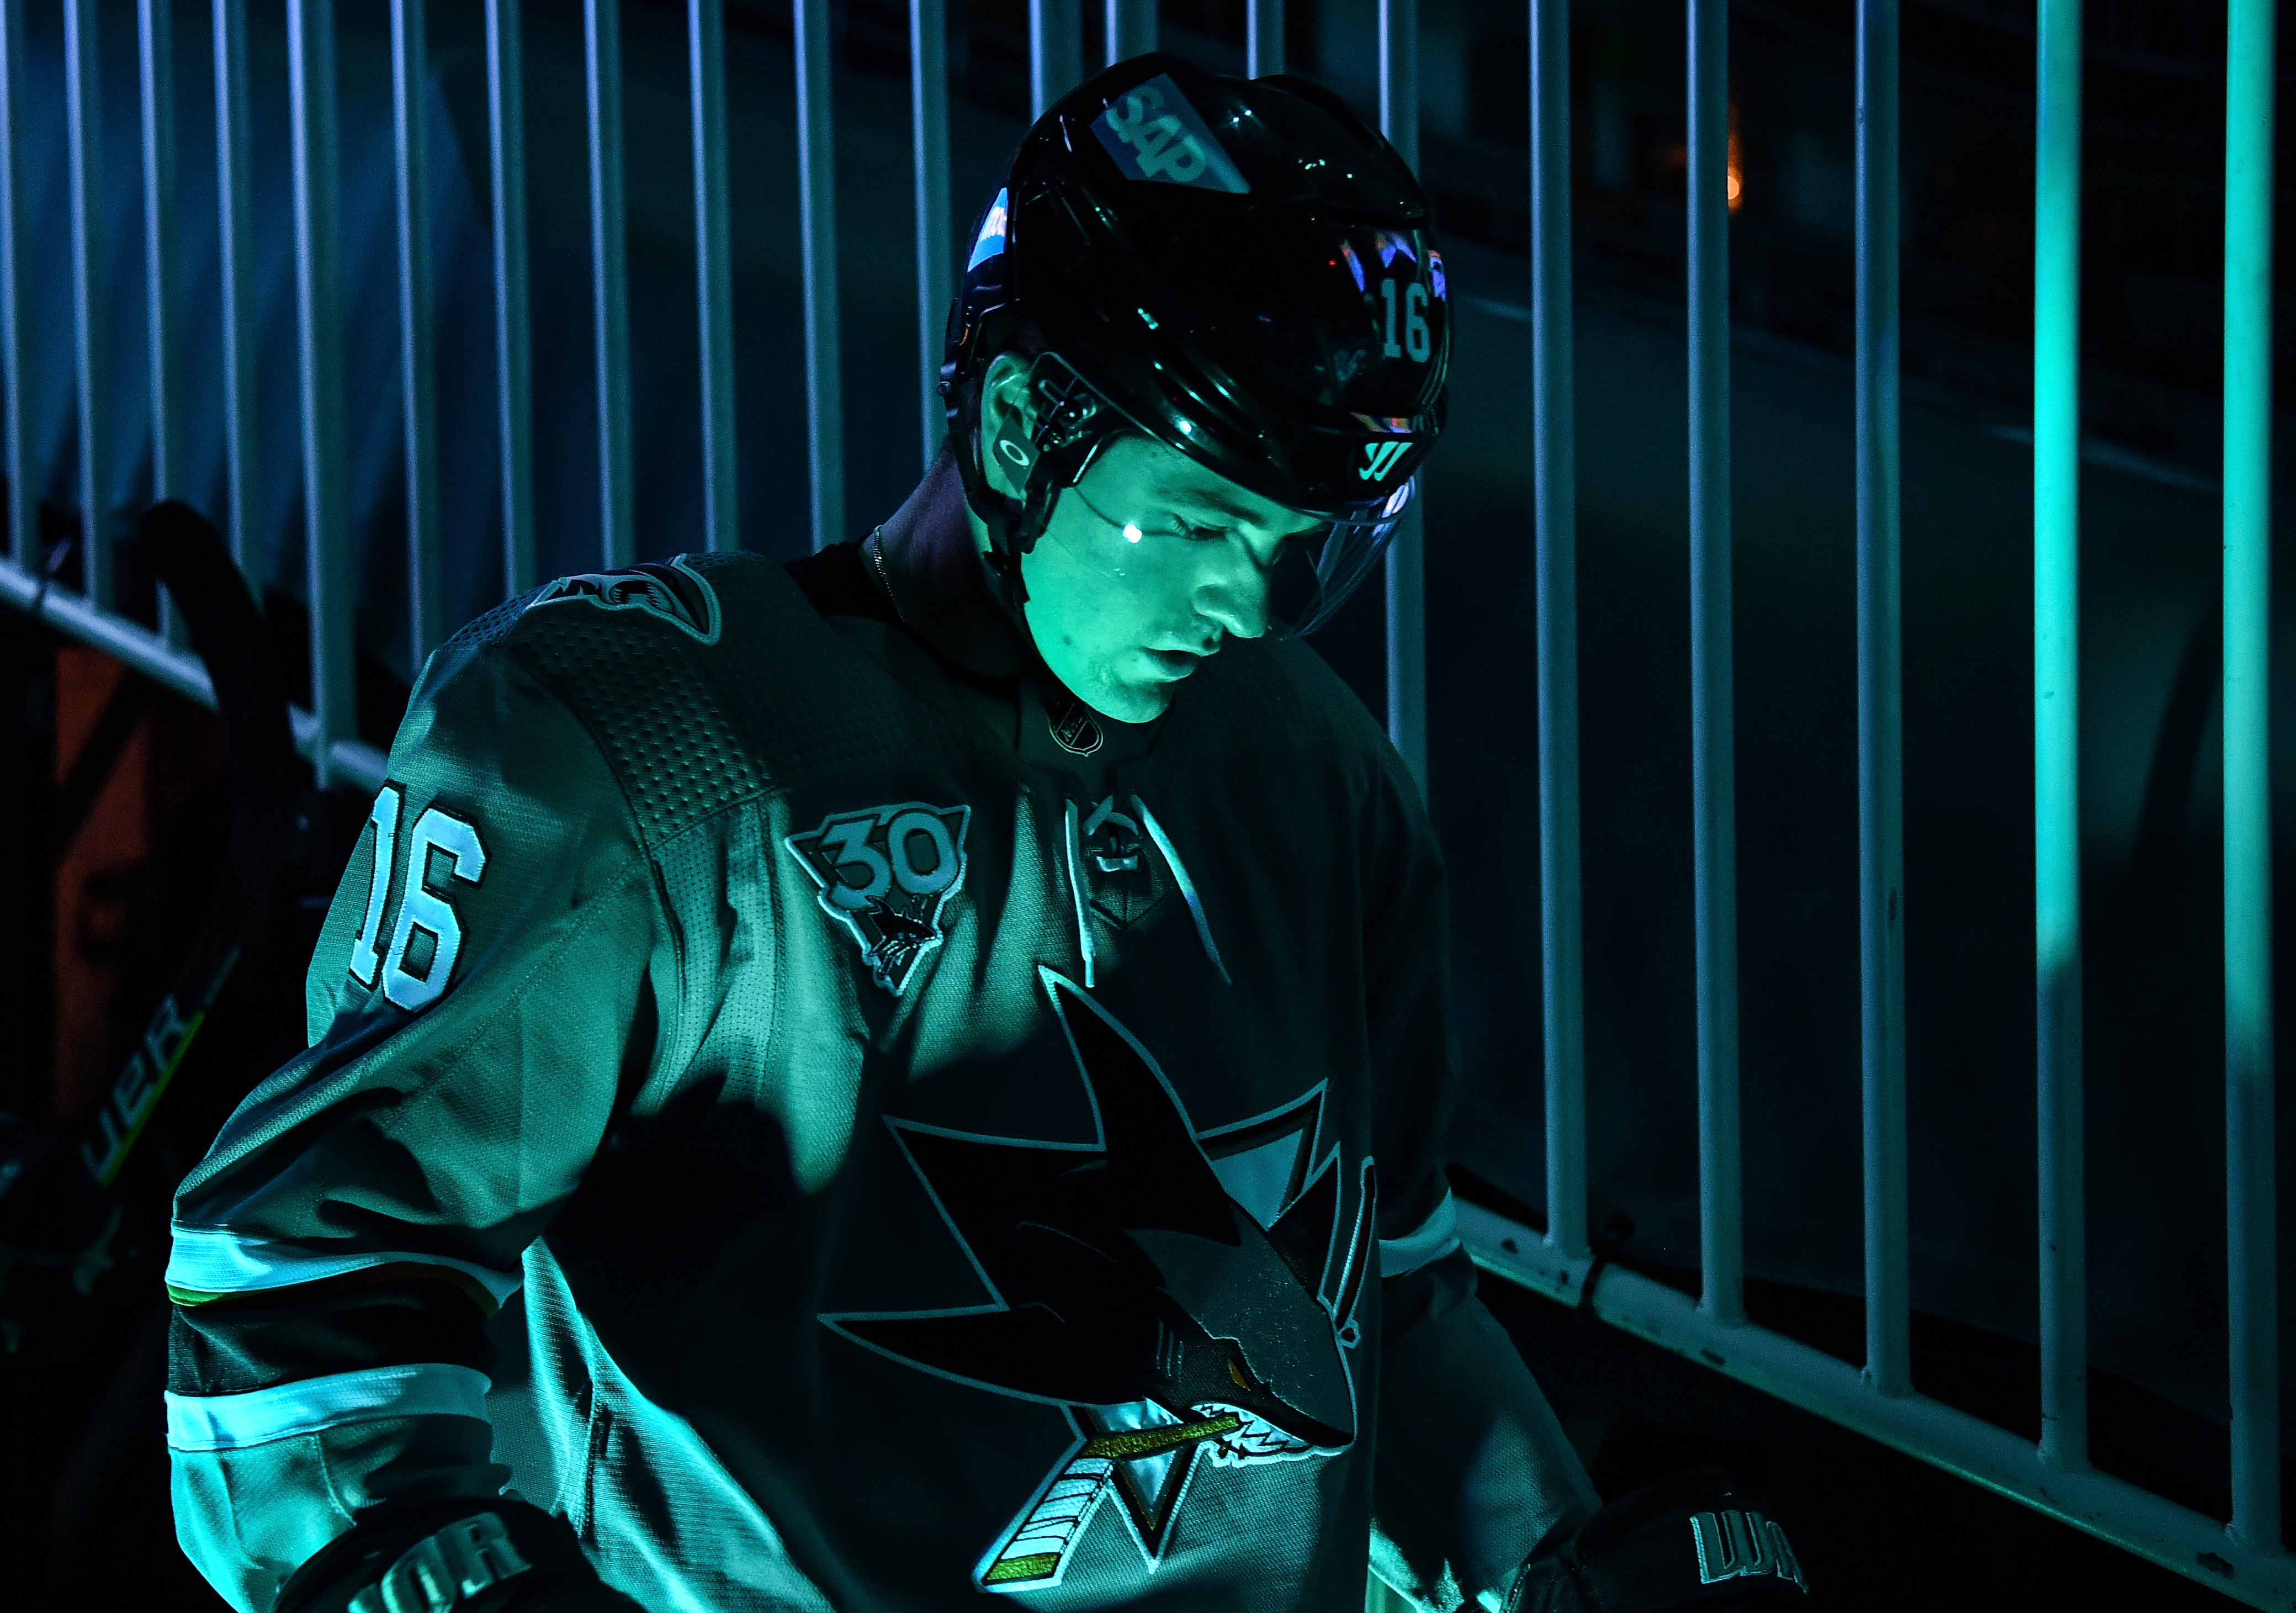 Ryan Donato #16 of the San Jose Sharks walks out onto the ice before facing the Anaheim Ducks at SAP Center on April 14, 2021 in San Jose, California.